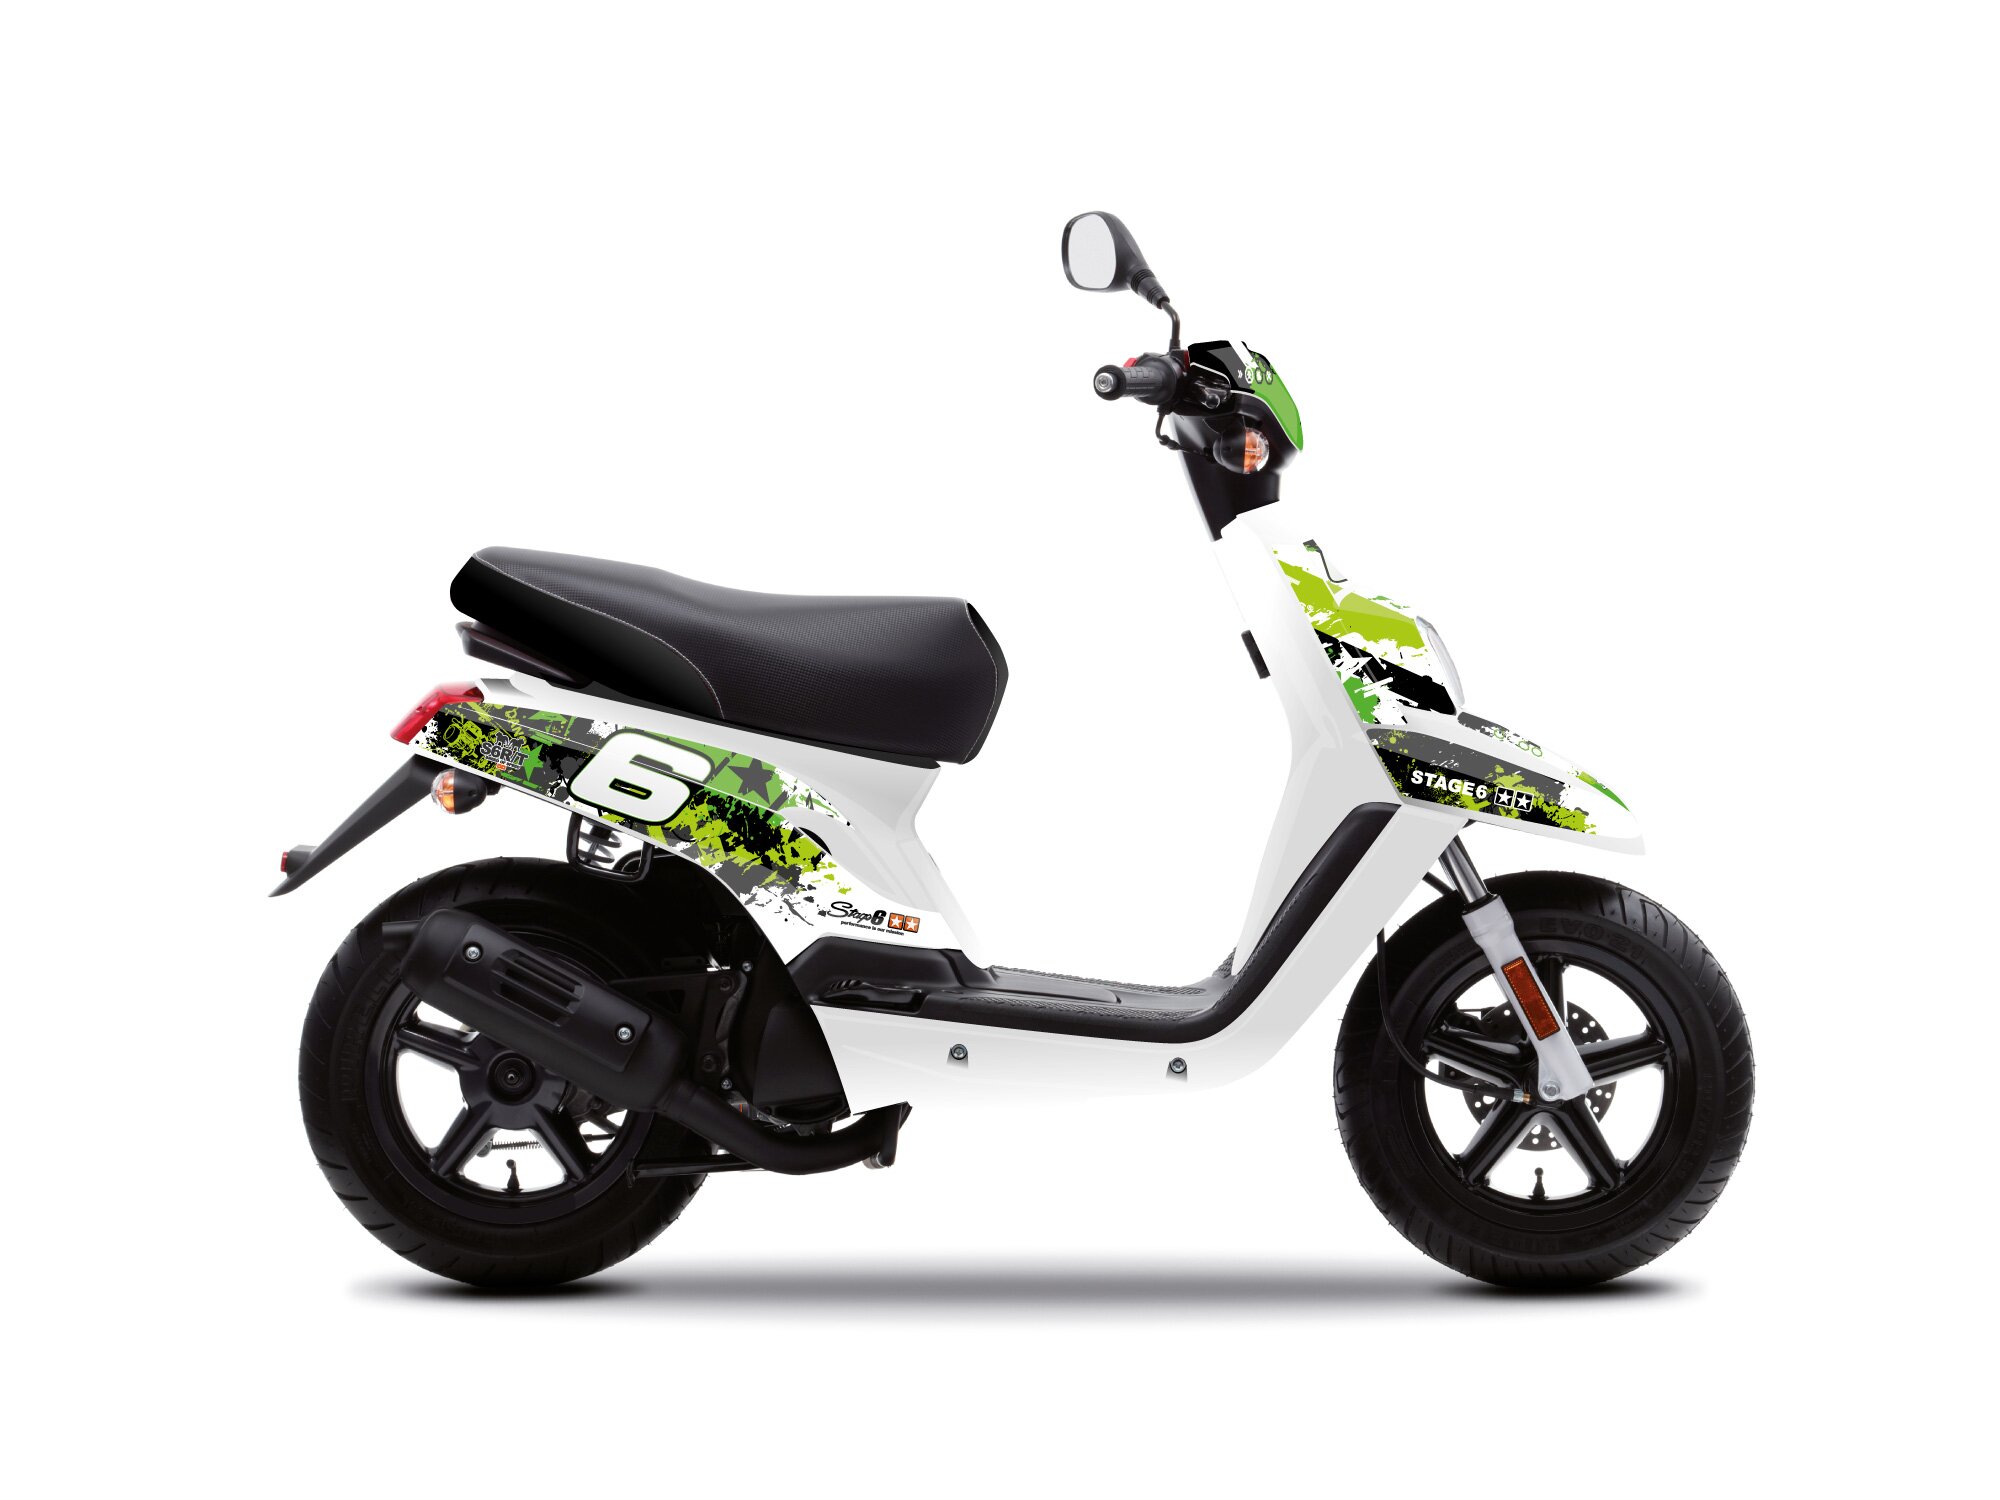 Scooter neuf MBK BOOSTER ONE 50cc. - L'atelier du scoot - L'atelier du scoot